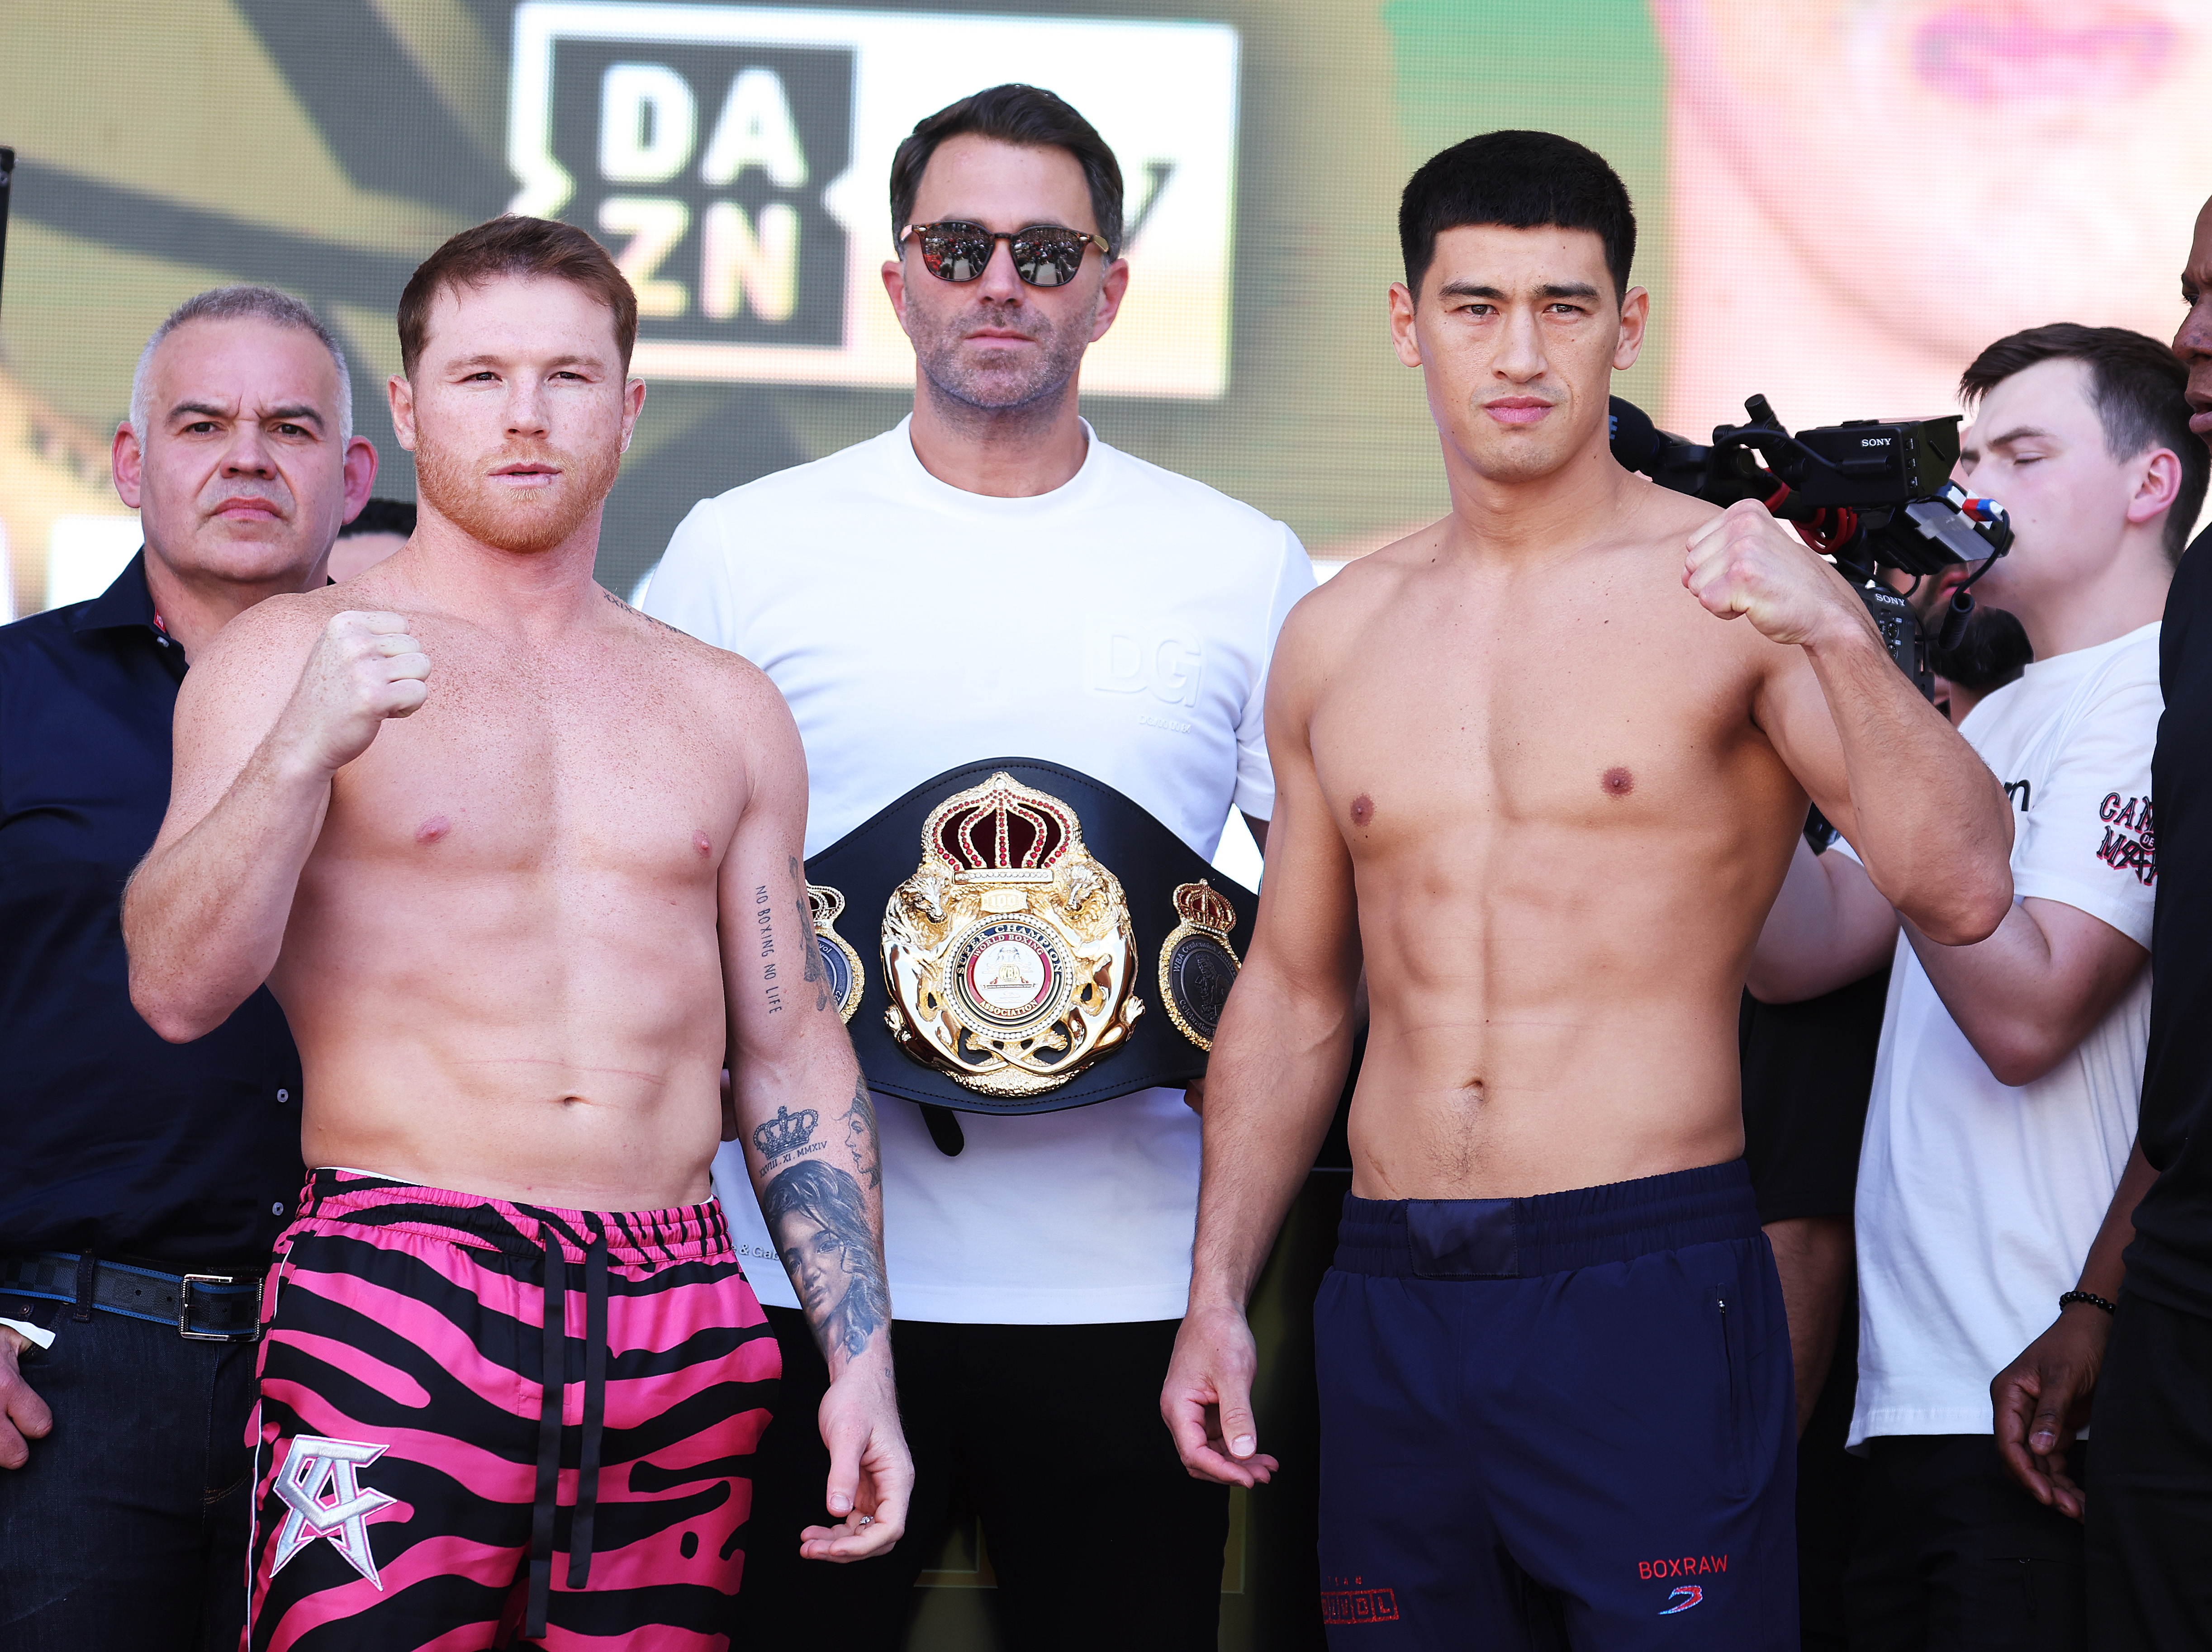 Canelo Álvarez, Eddie Hearn and Dmitry Bivol at the pre-fight weigh-in ceremony in Las Vegas (Photo: Al Bello/Getty Images)